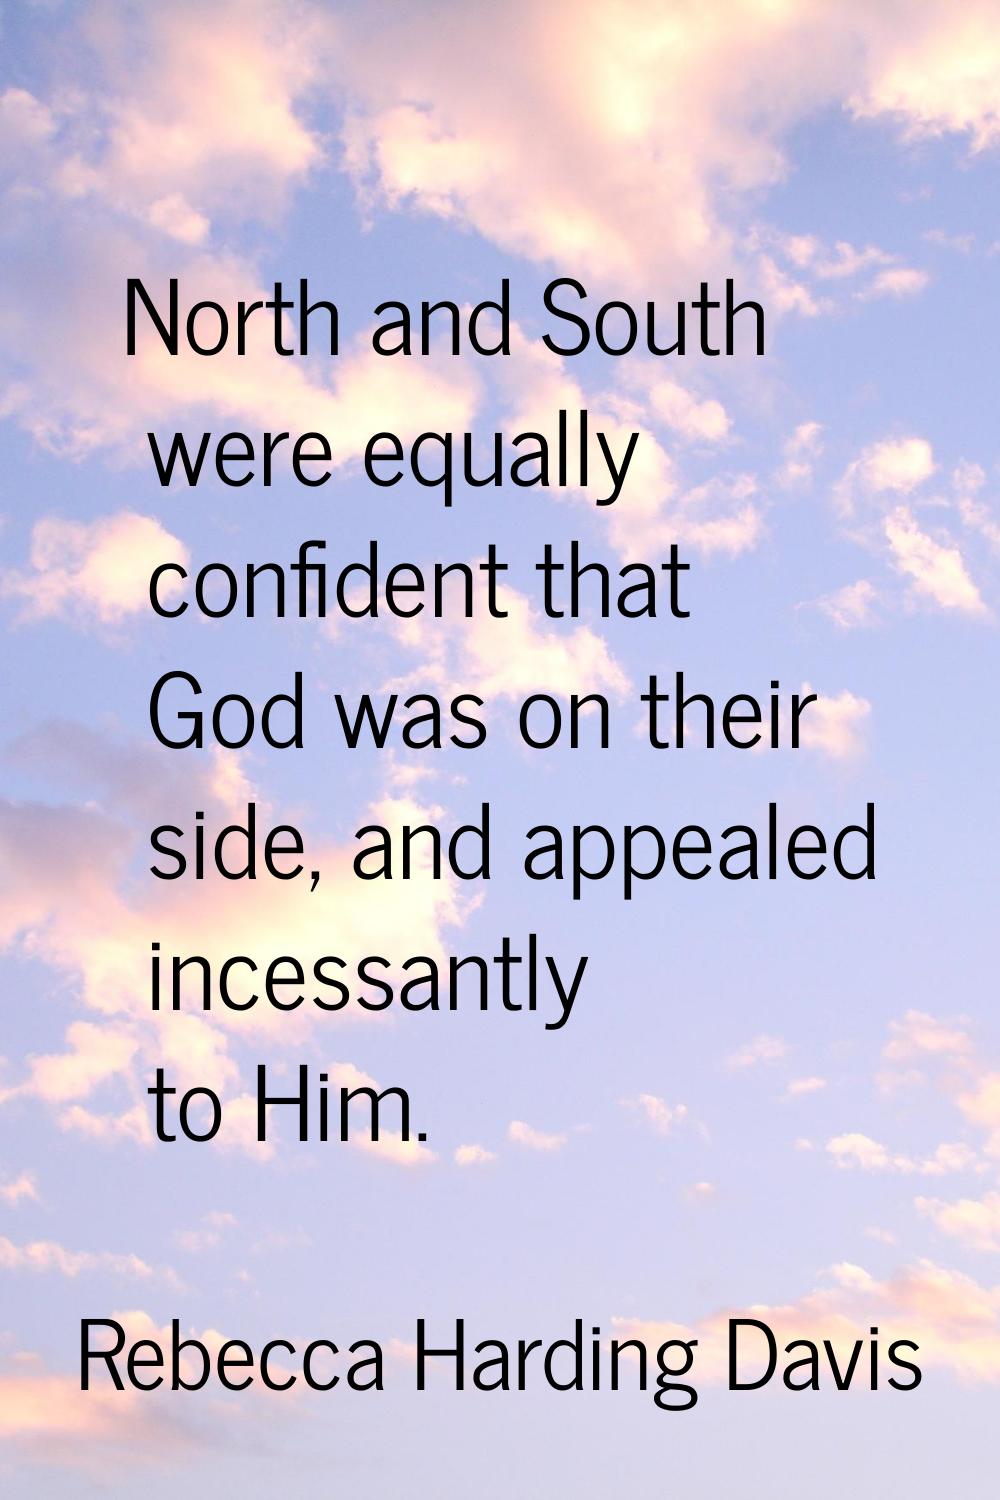 North and South were equally confident that God was on their side, and appealed incessantly to Him.